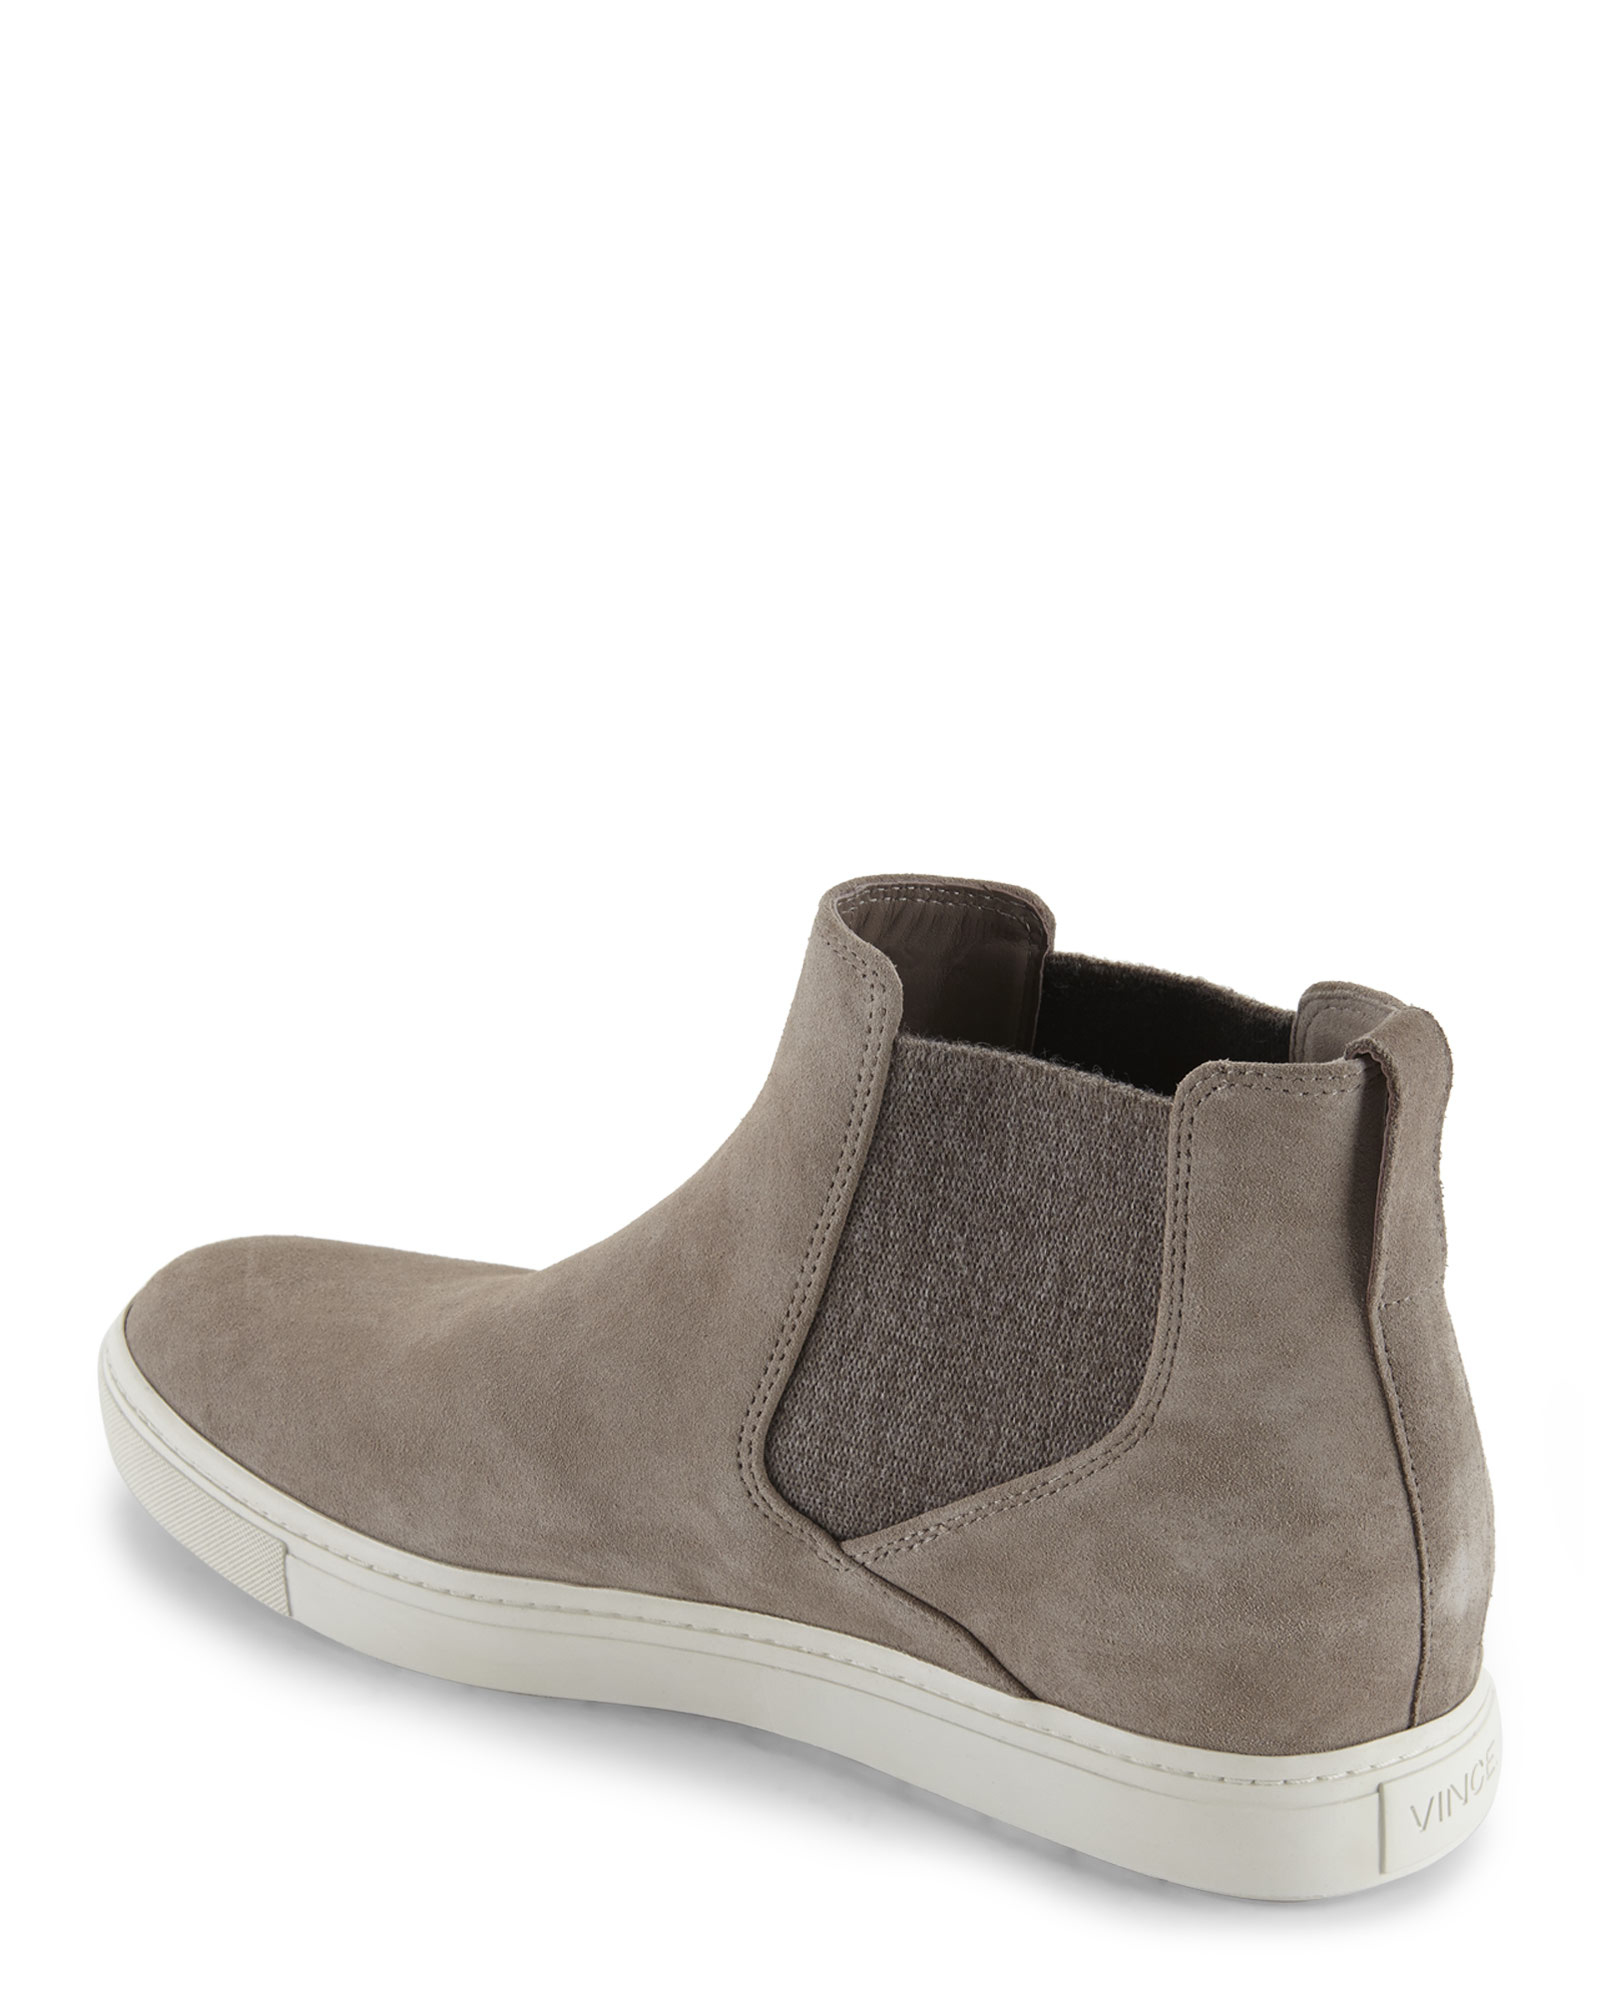 high top slip on sneakers cheap online